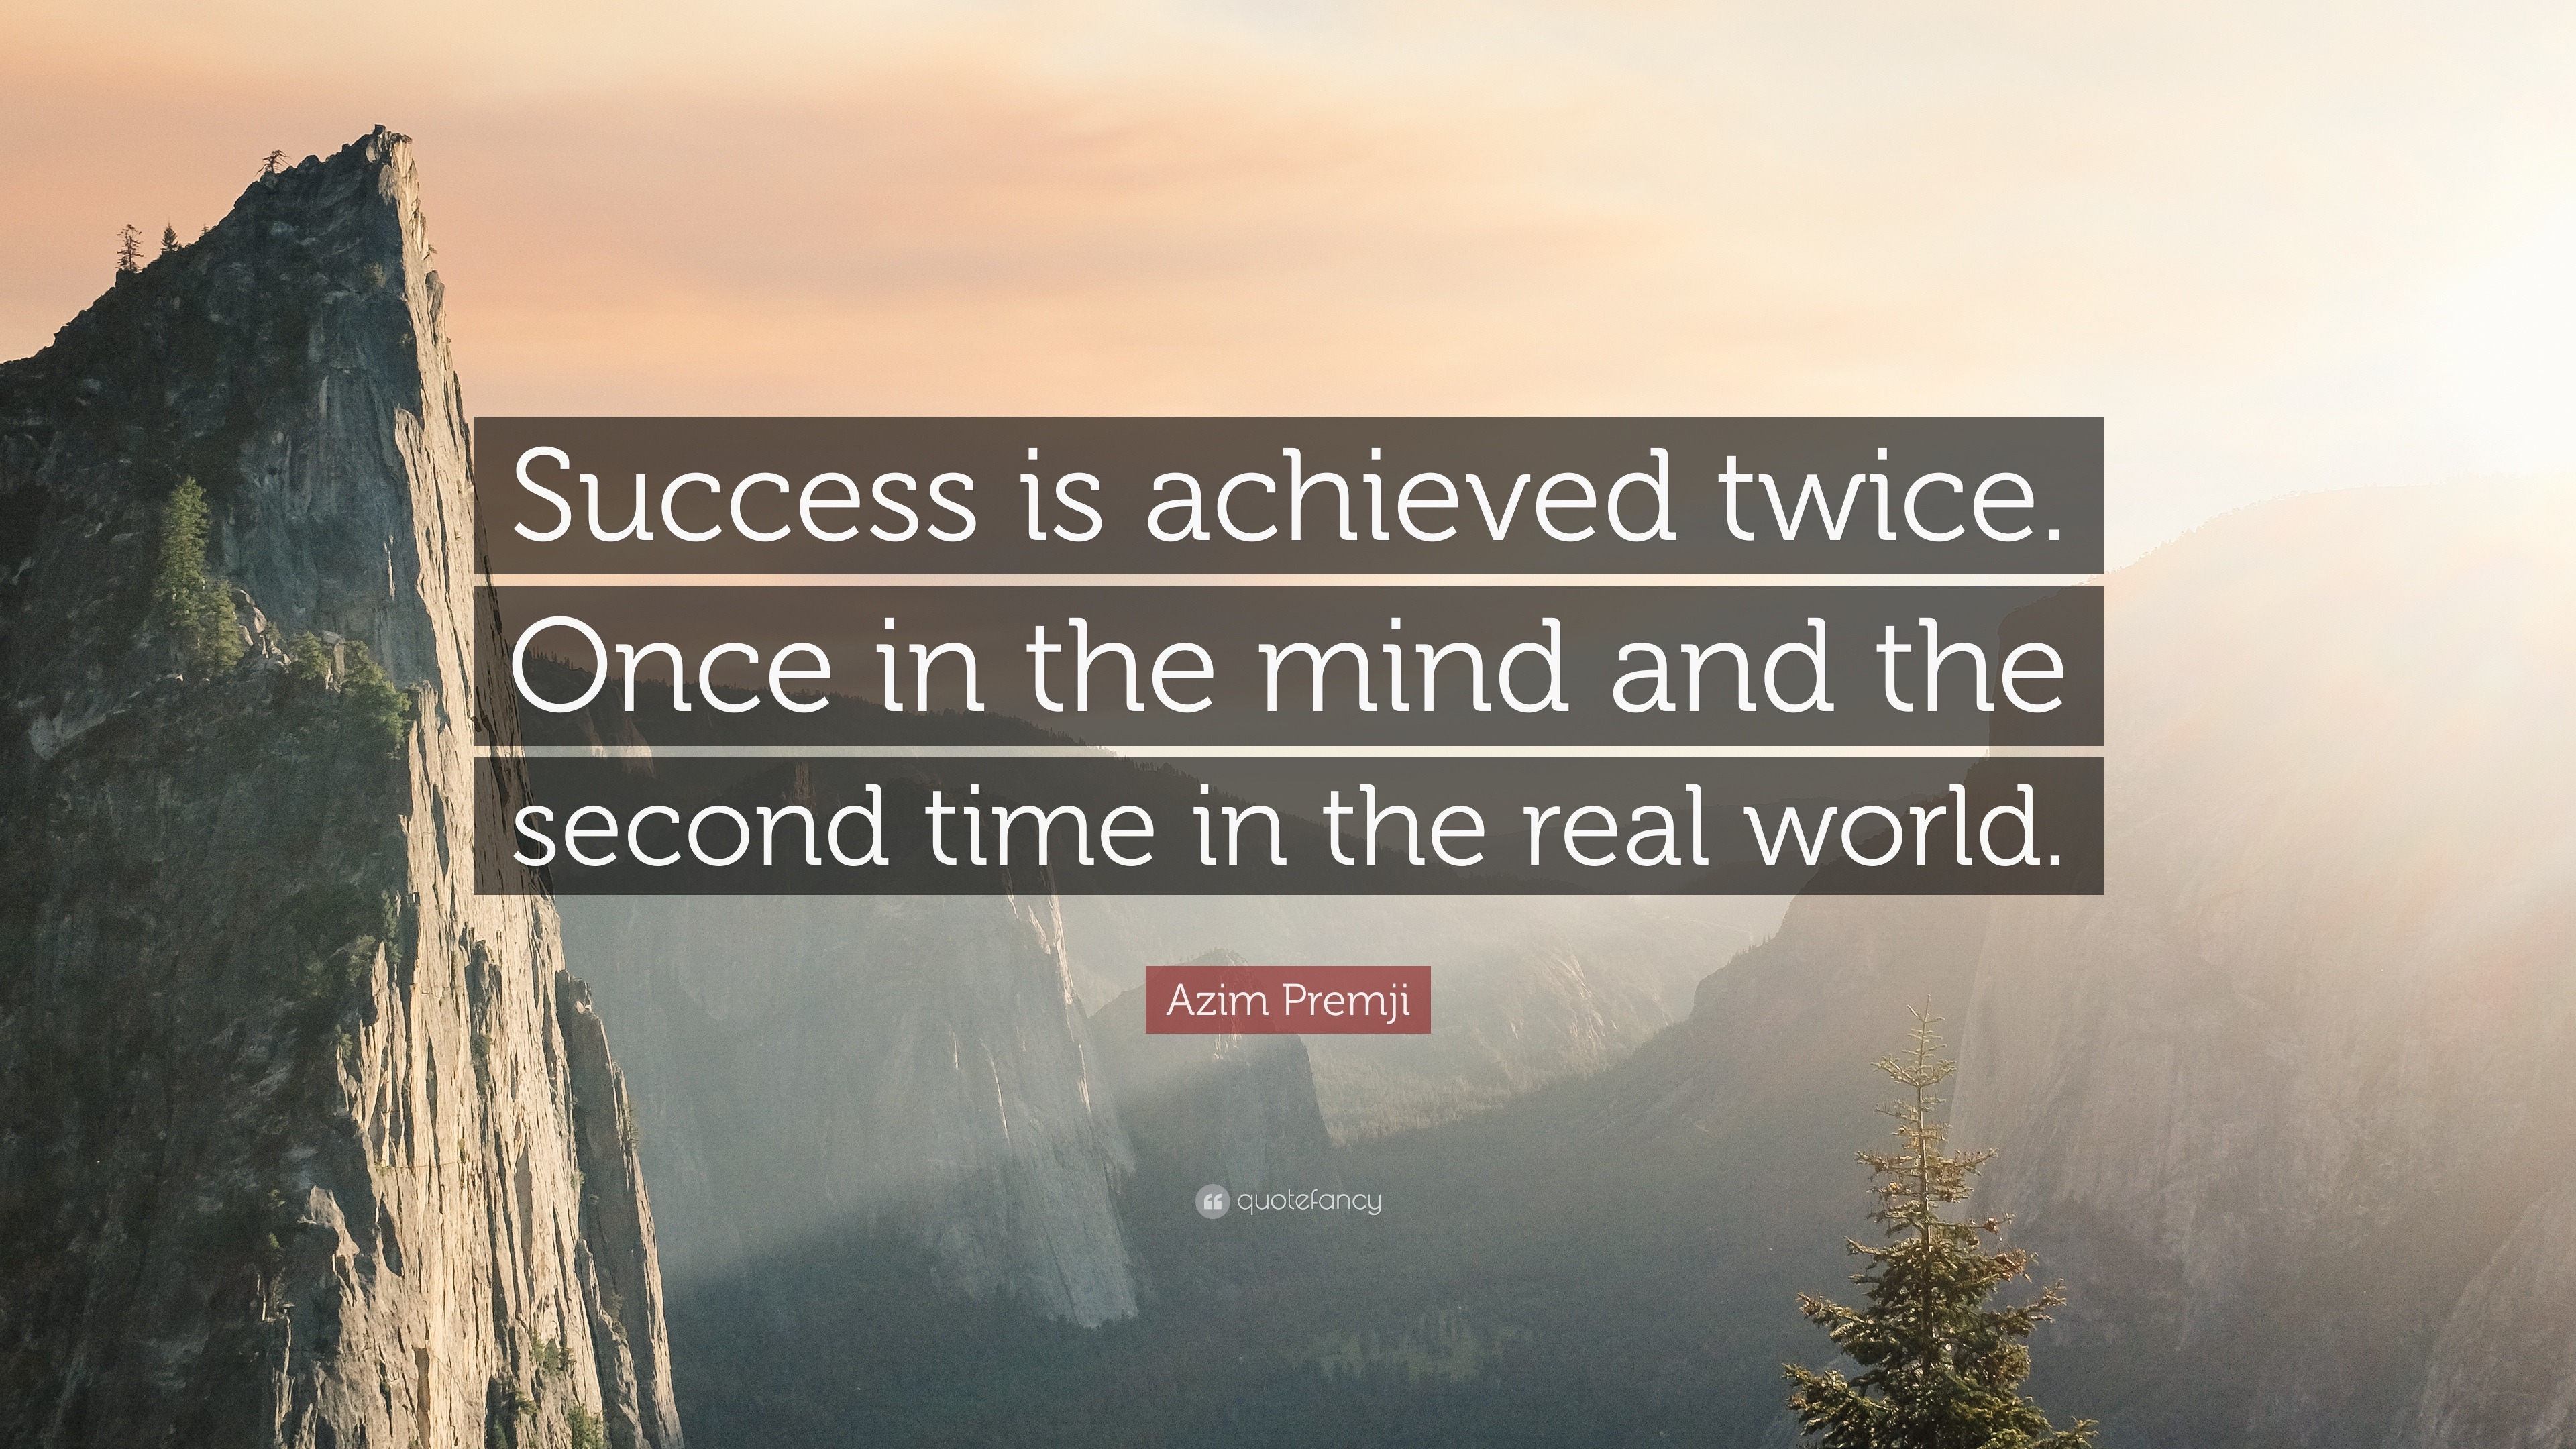 Azim Premji Quote: “Success is achieved twice. Once in the mind and the